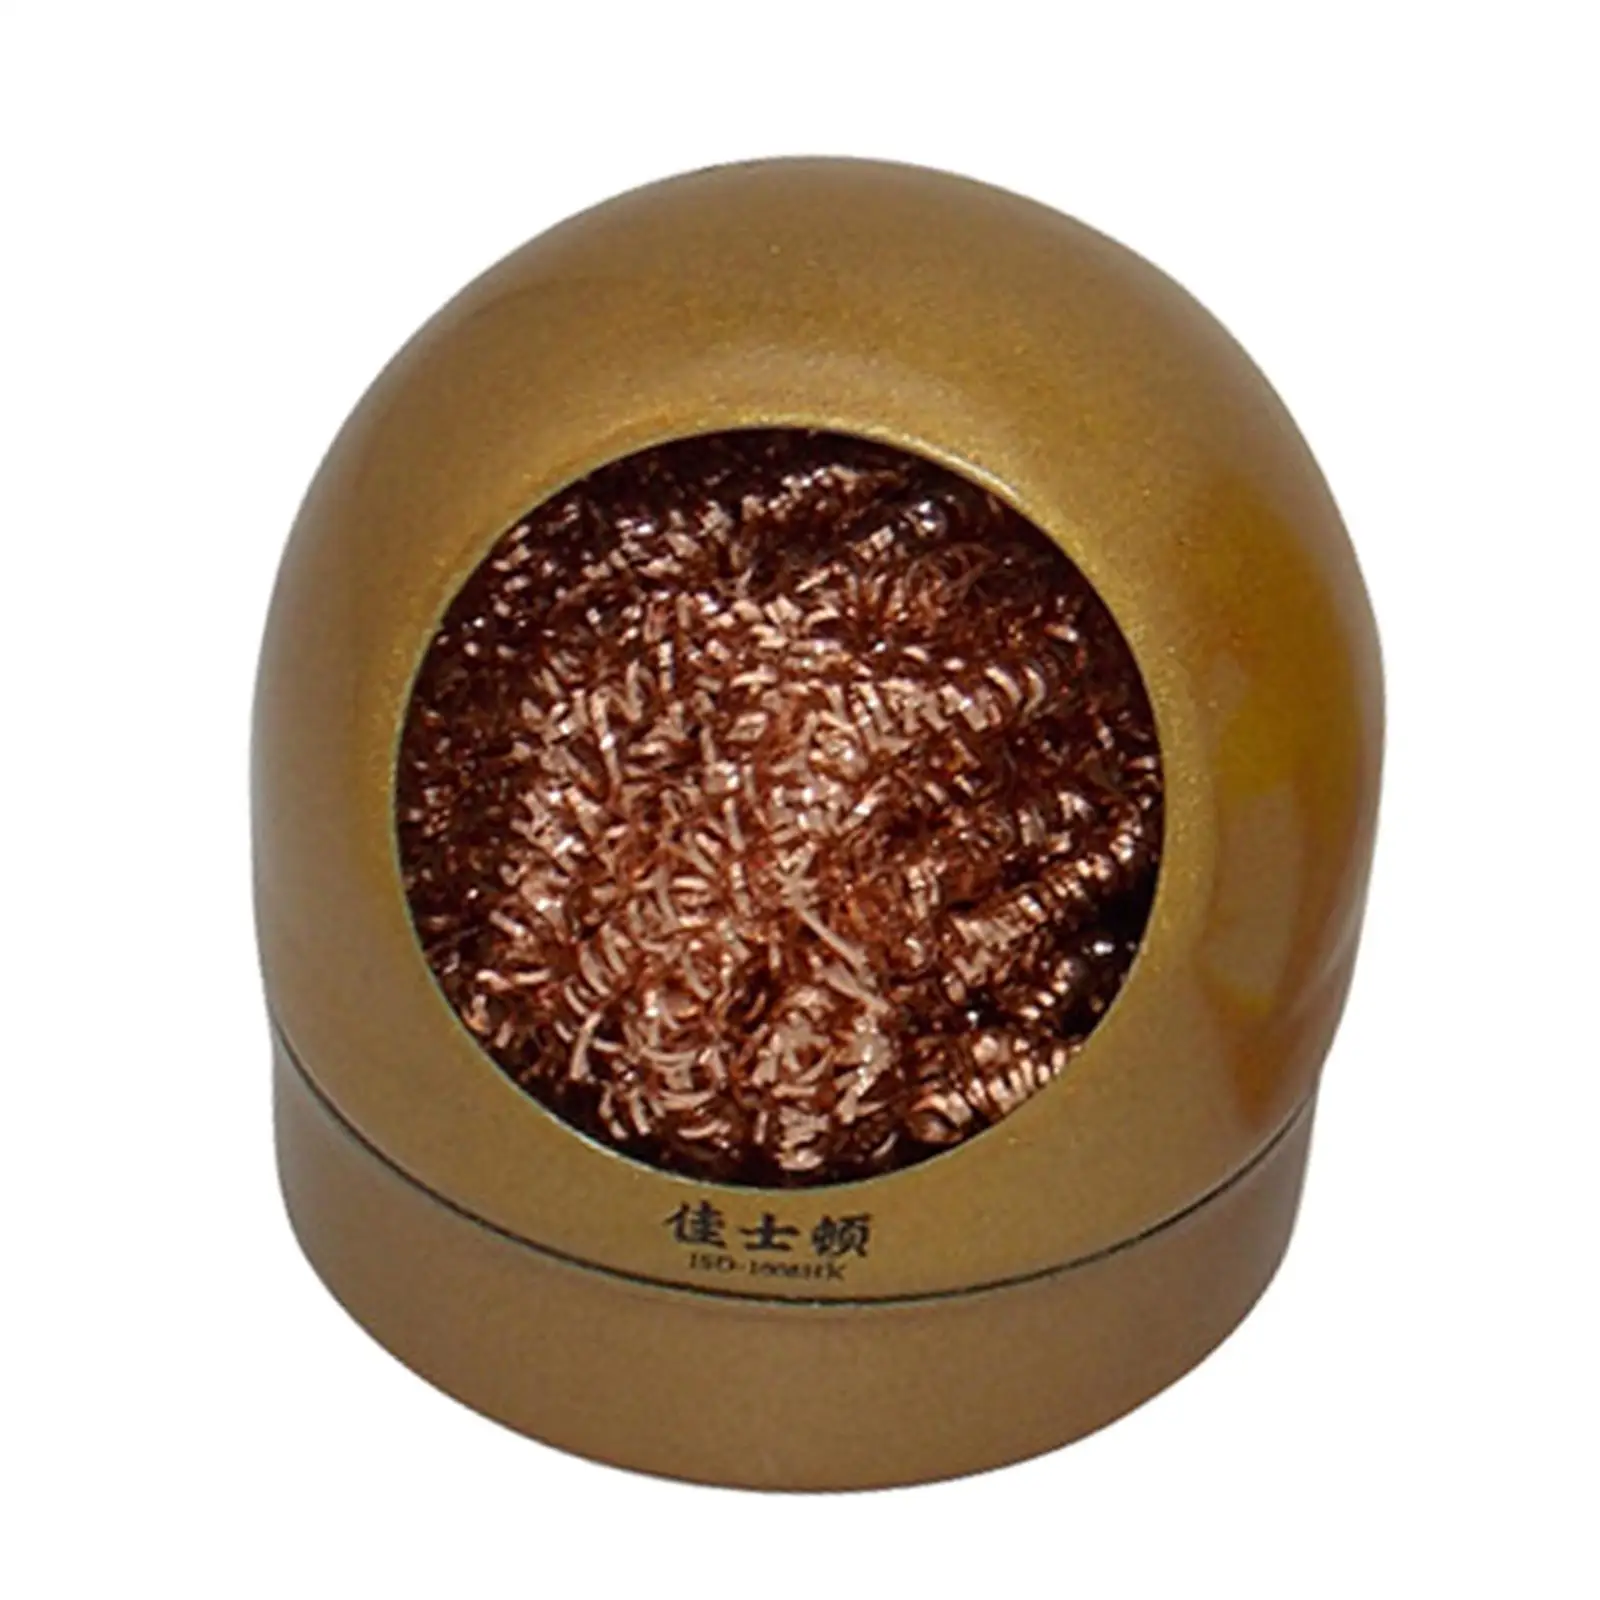 Solder Tip Cleaner Coiled Brass Wire Sponge for Prolong The Tip Life